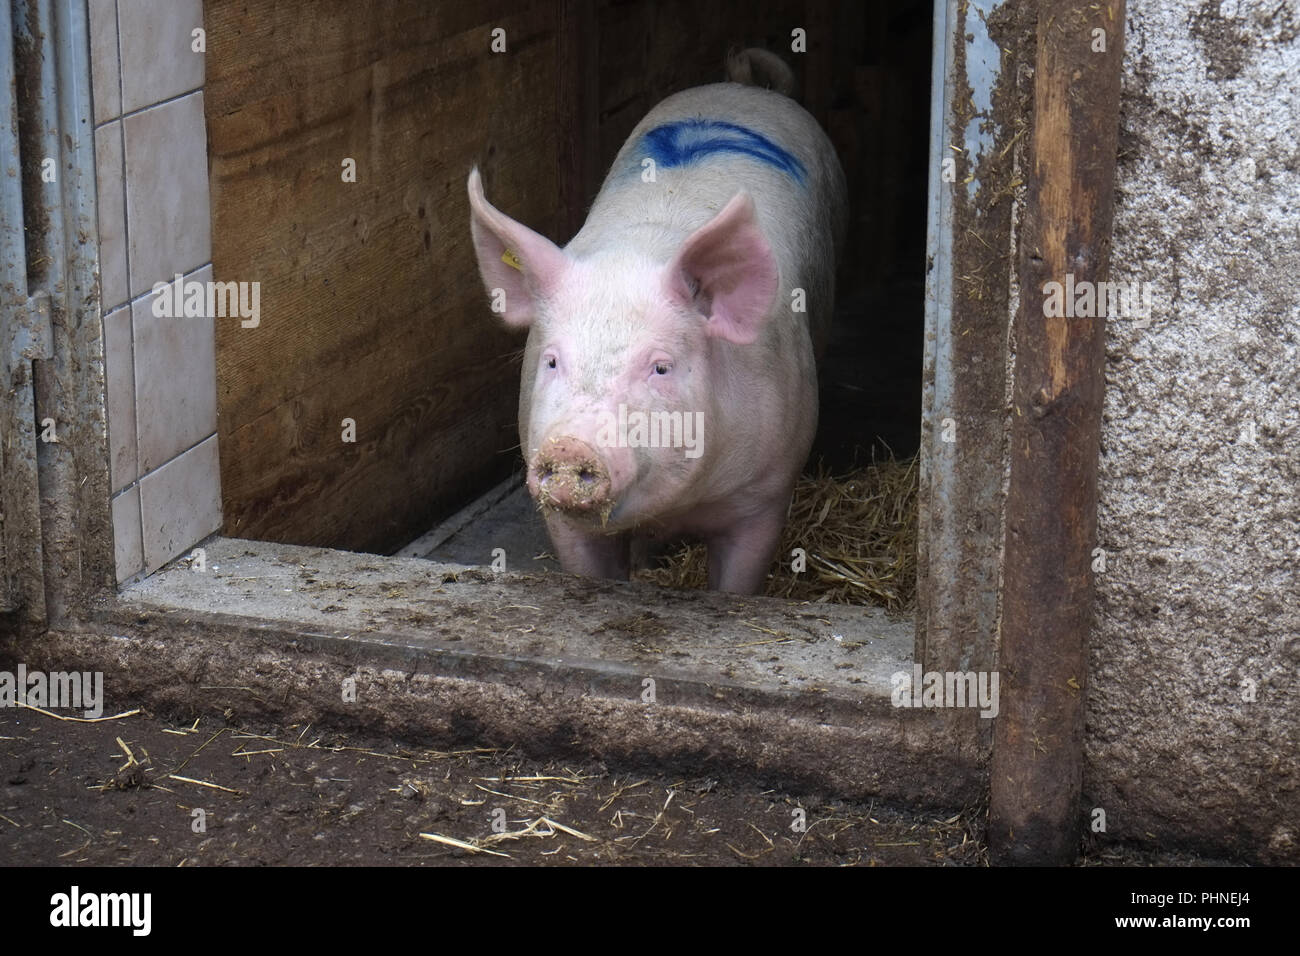 Domestic pig at the the stable door Stock Photo